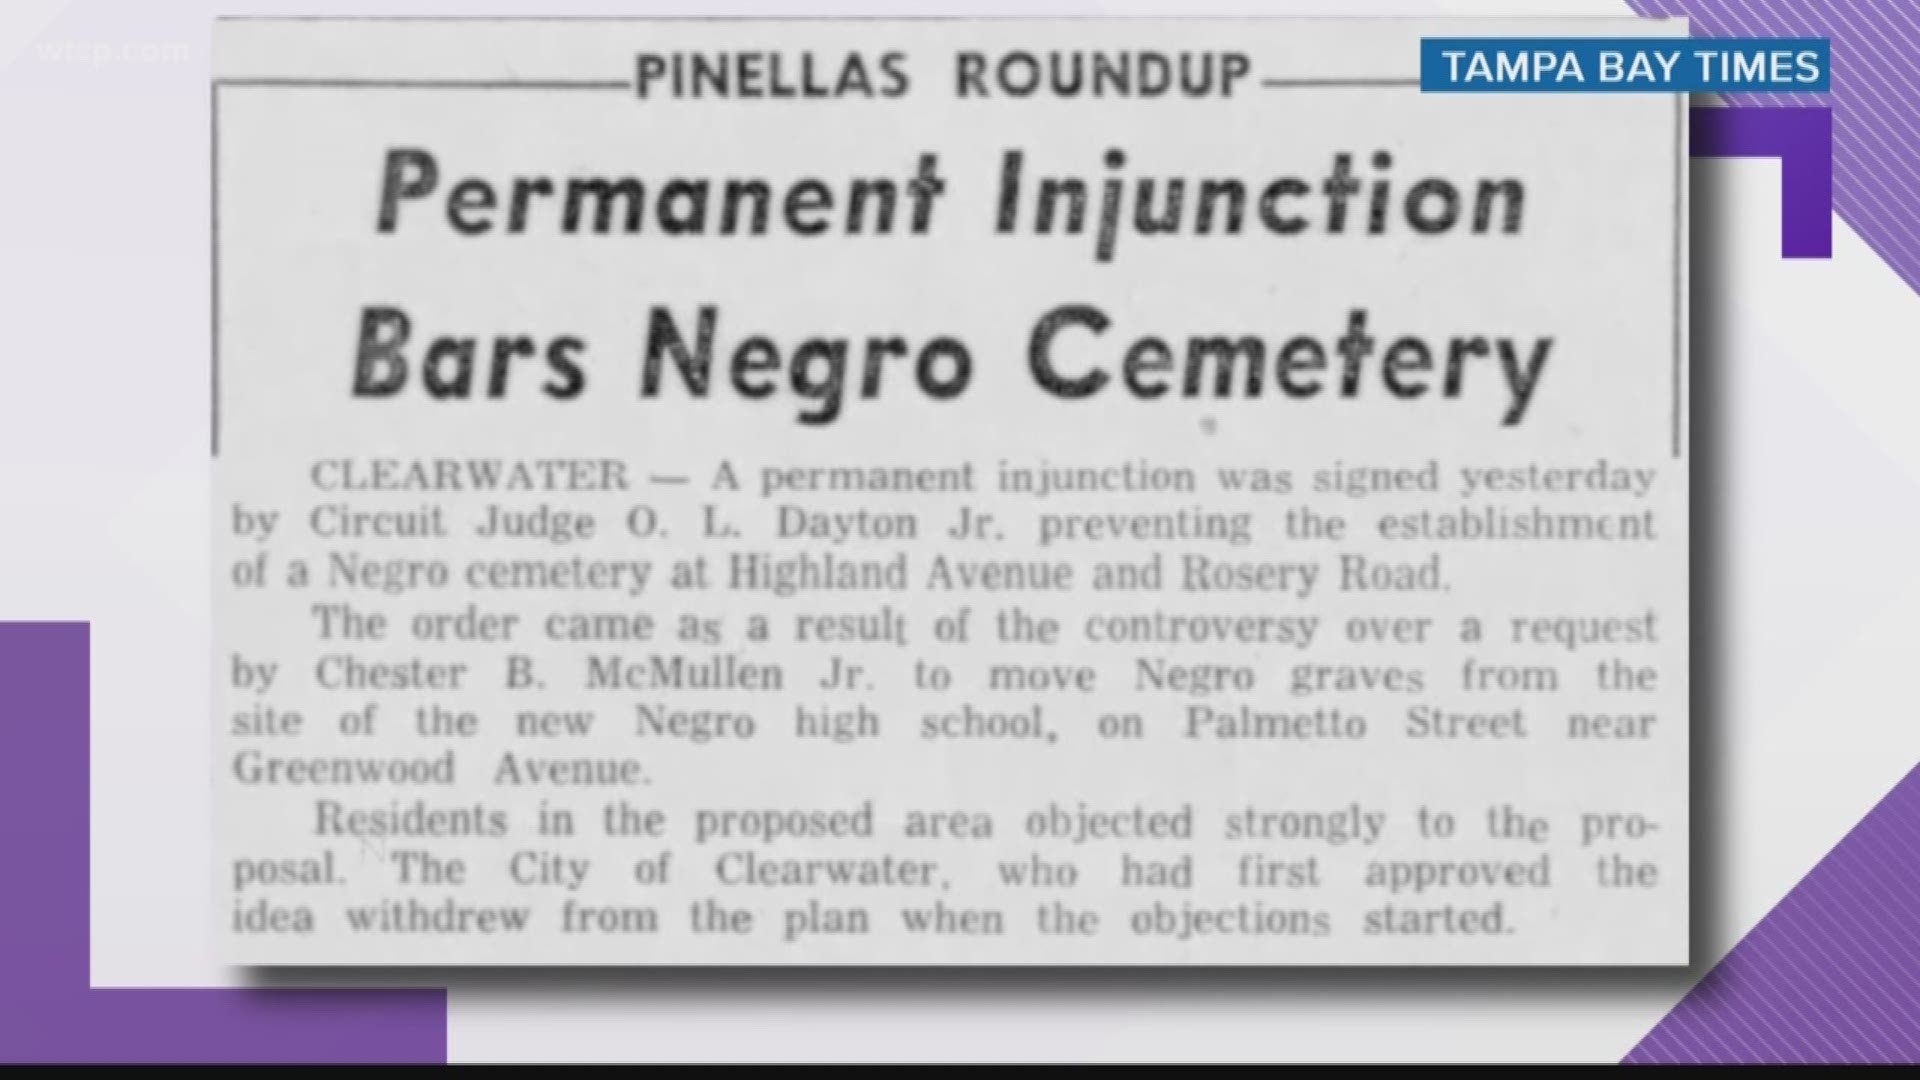 Neighbors in Pinellas County went to court to keep an African American cemetery from being moved near their homes.